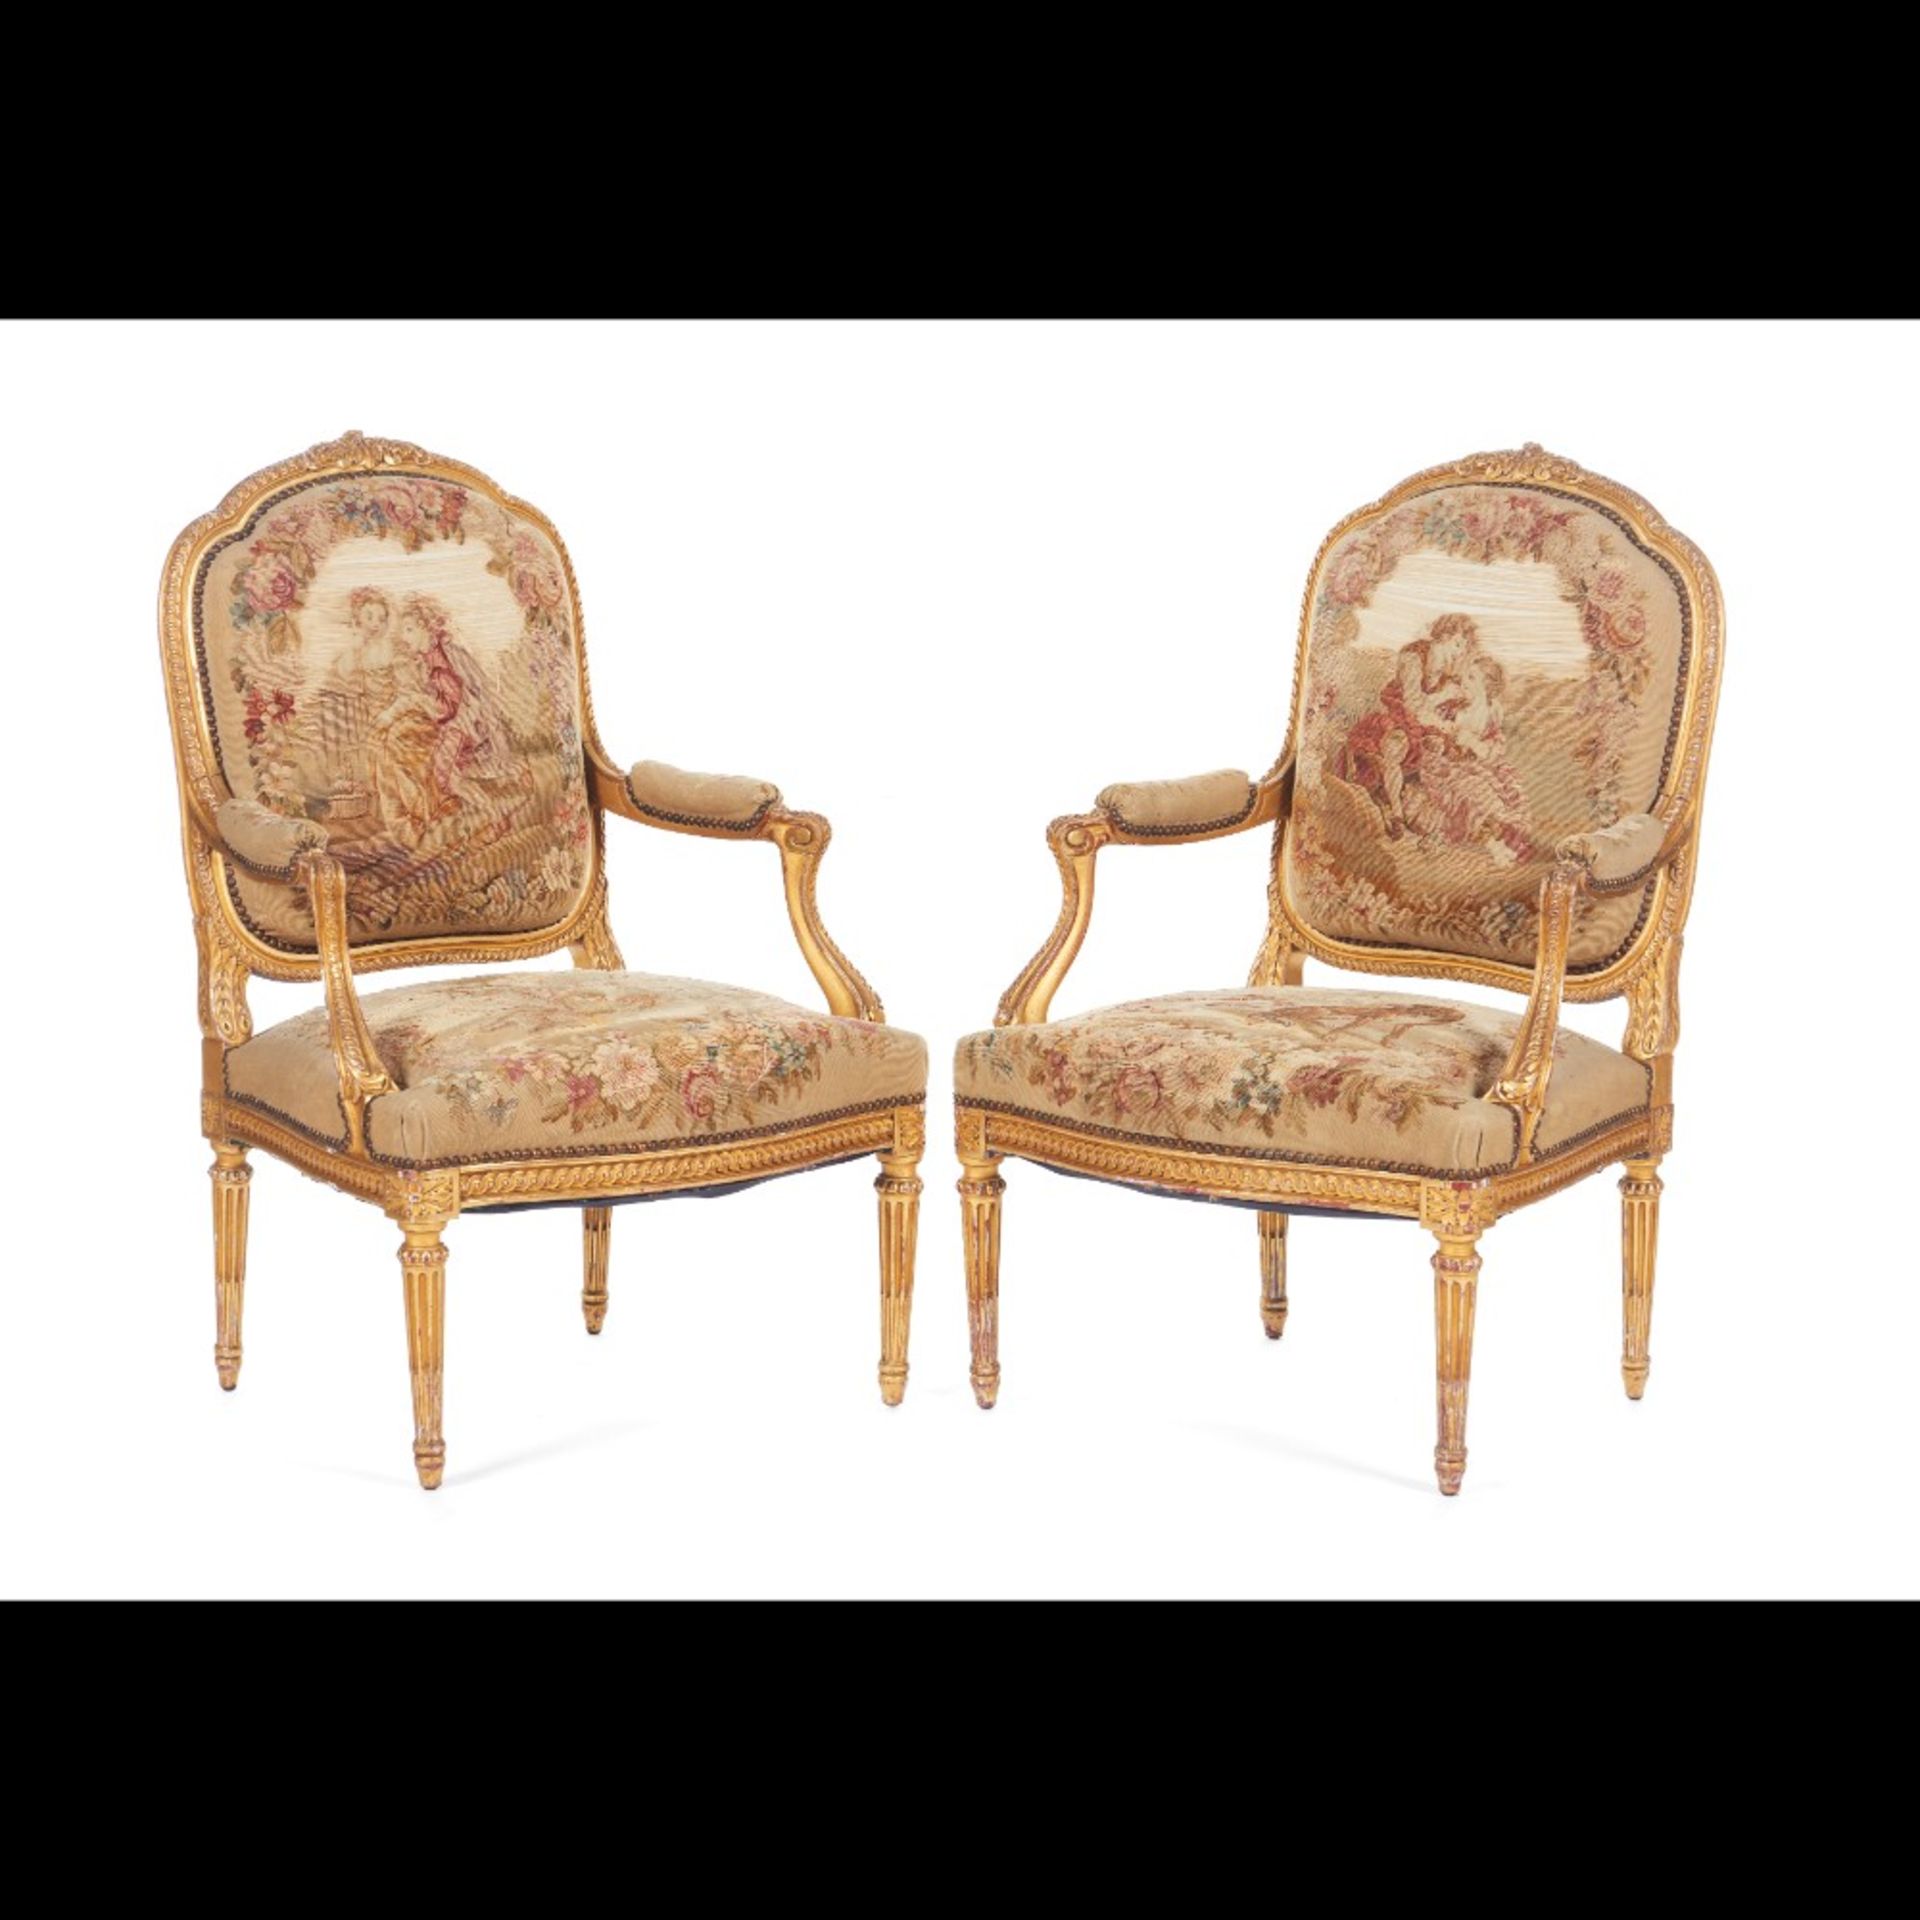  A pair of Louis XV style fauteuils and settee - Image 3 of 4